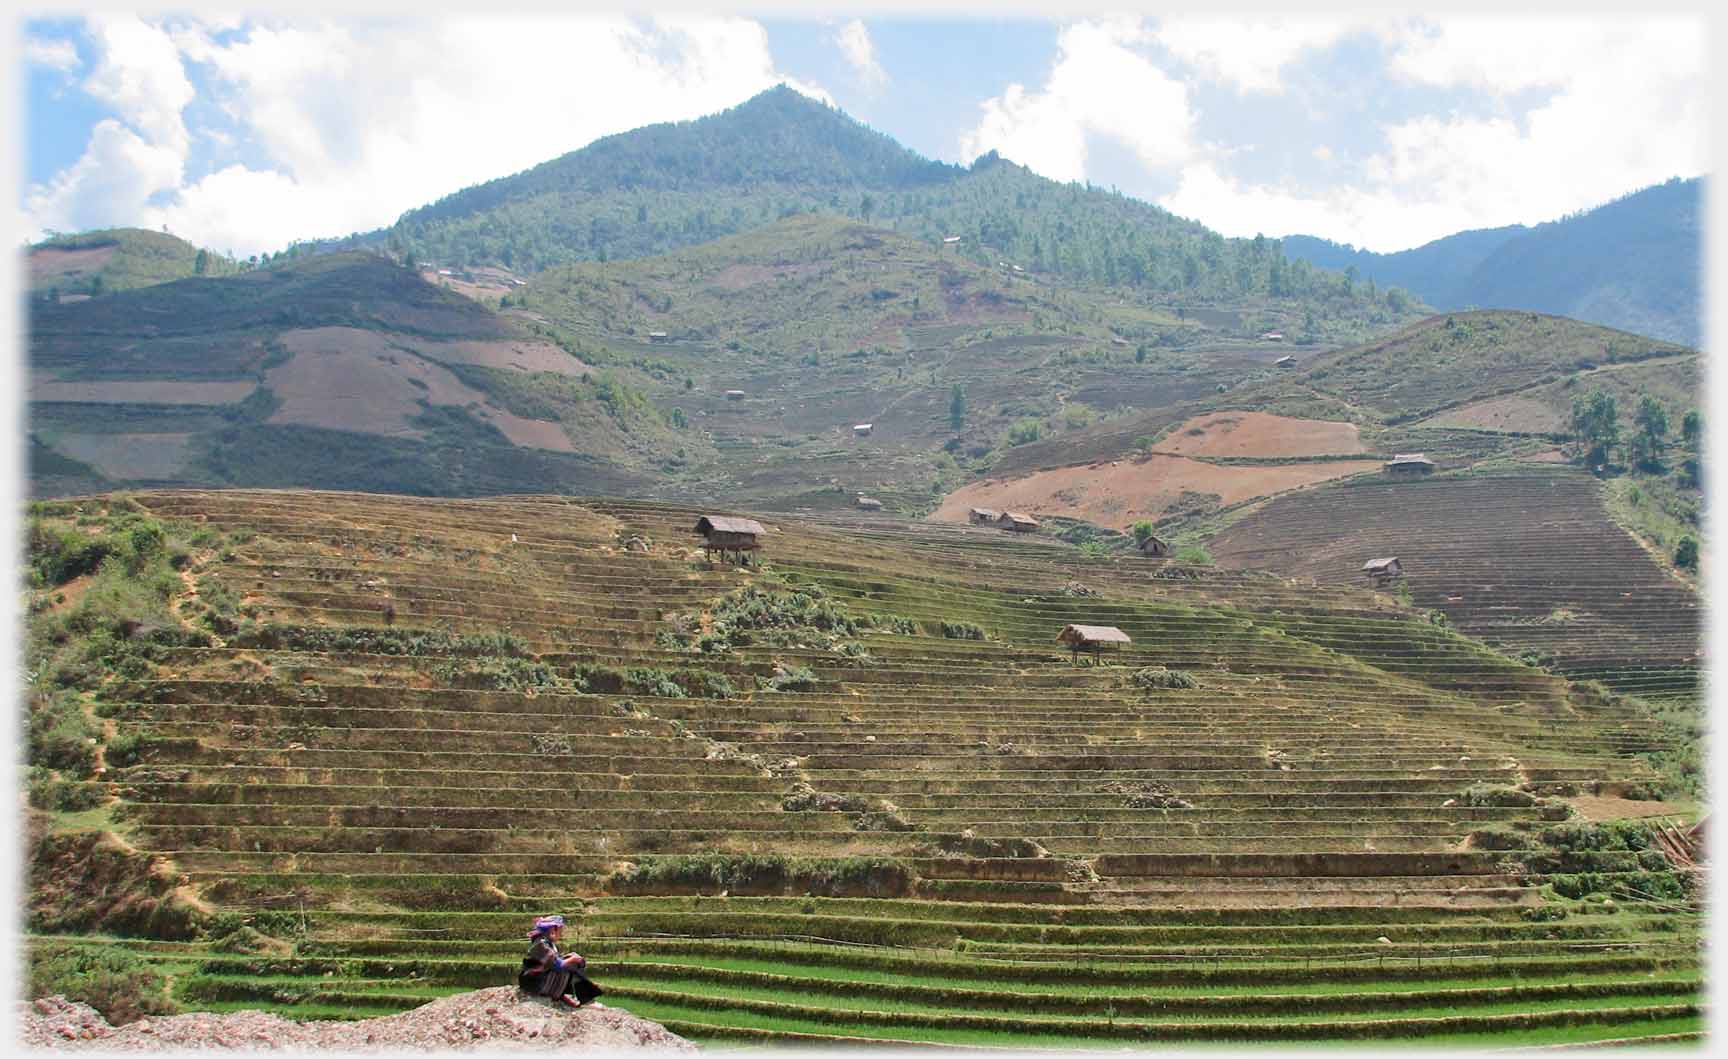 Small figure sitting with expansive terraced landscape beyond.